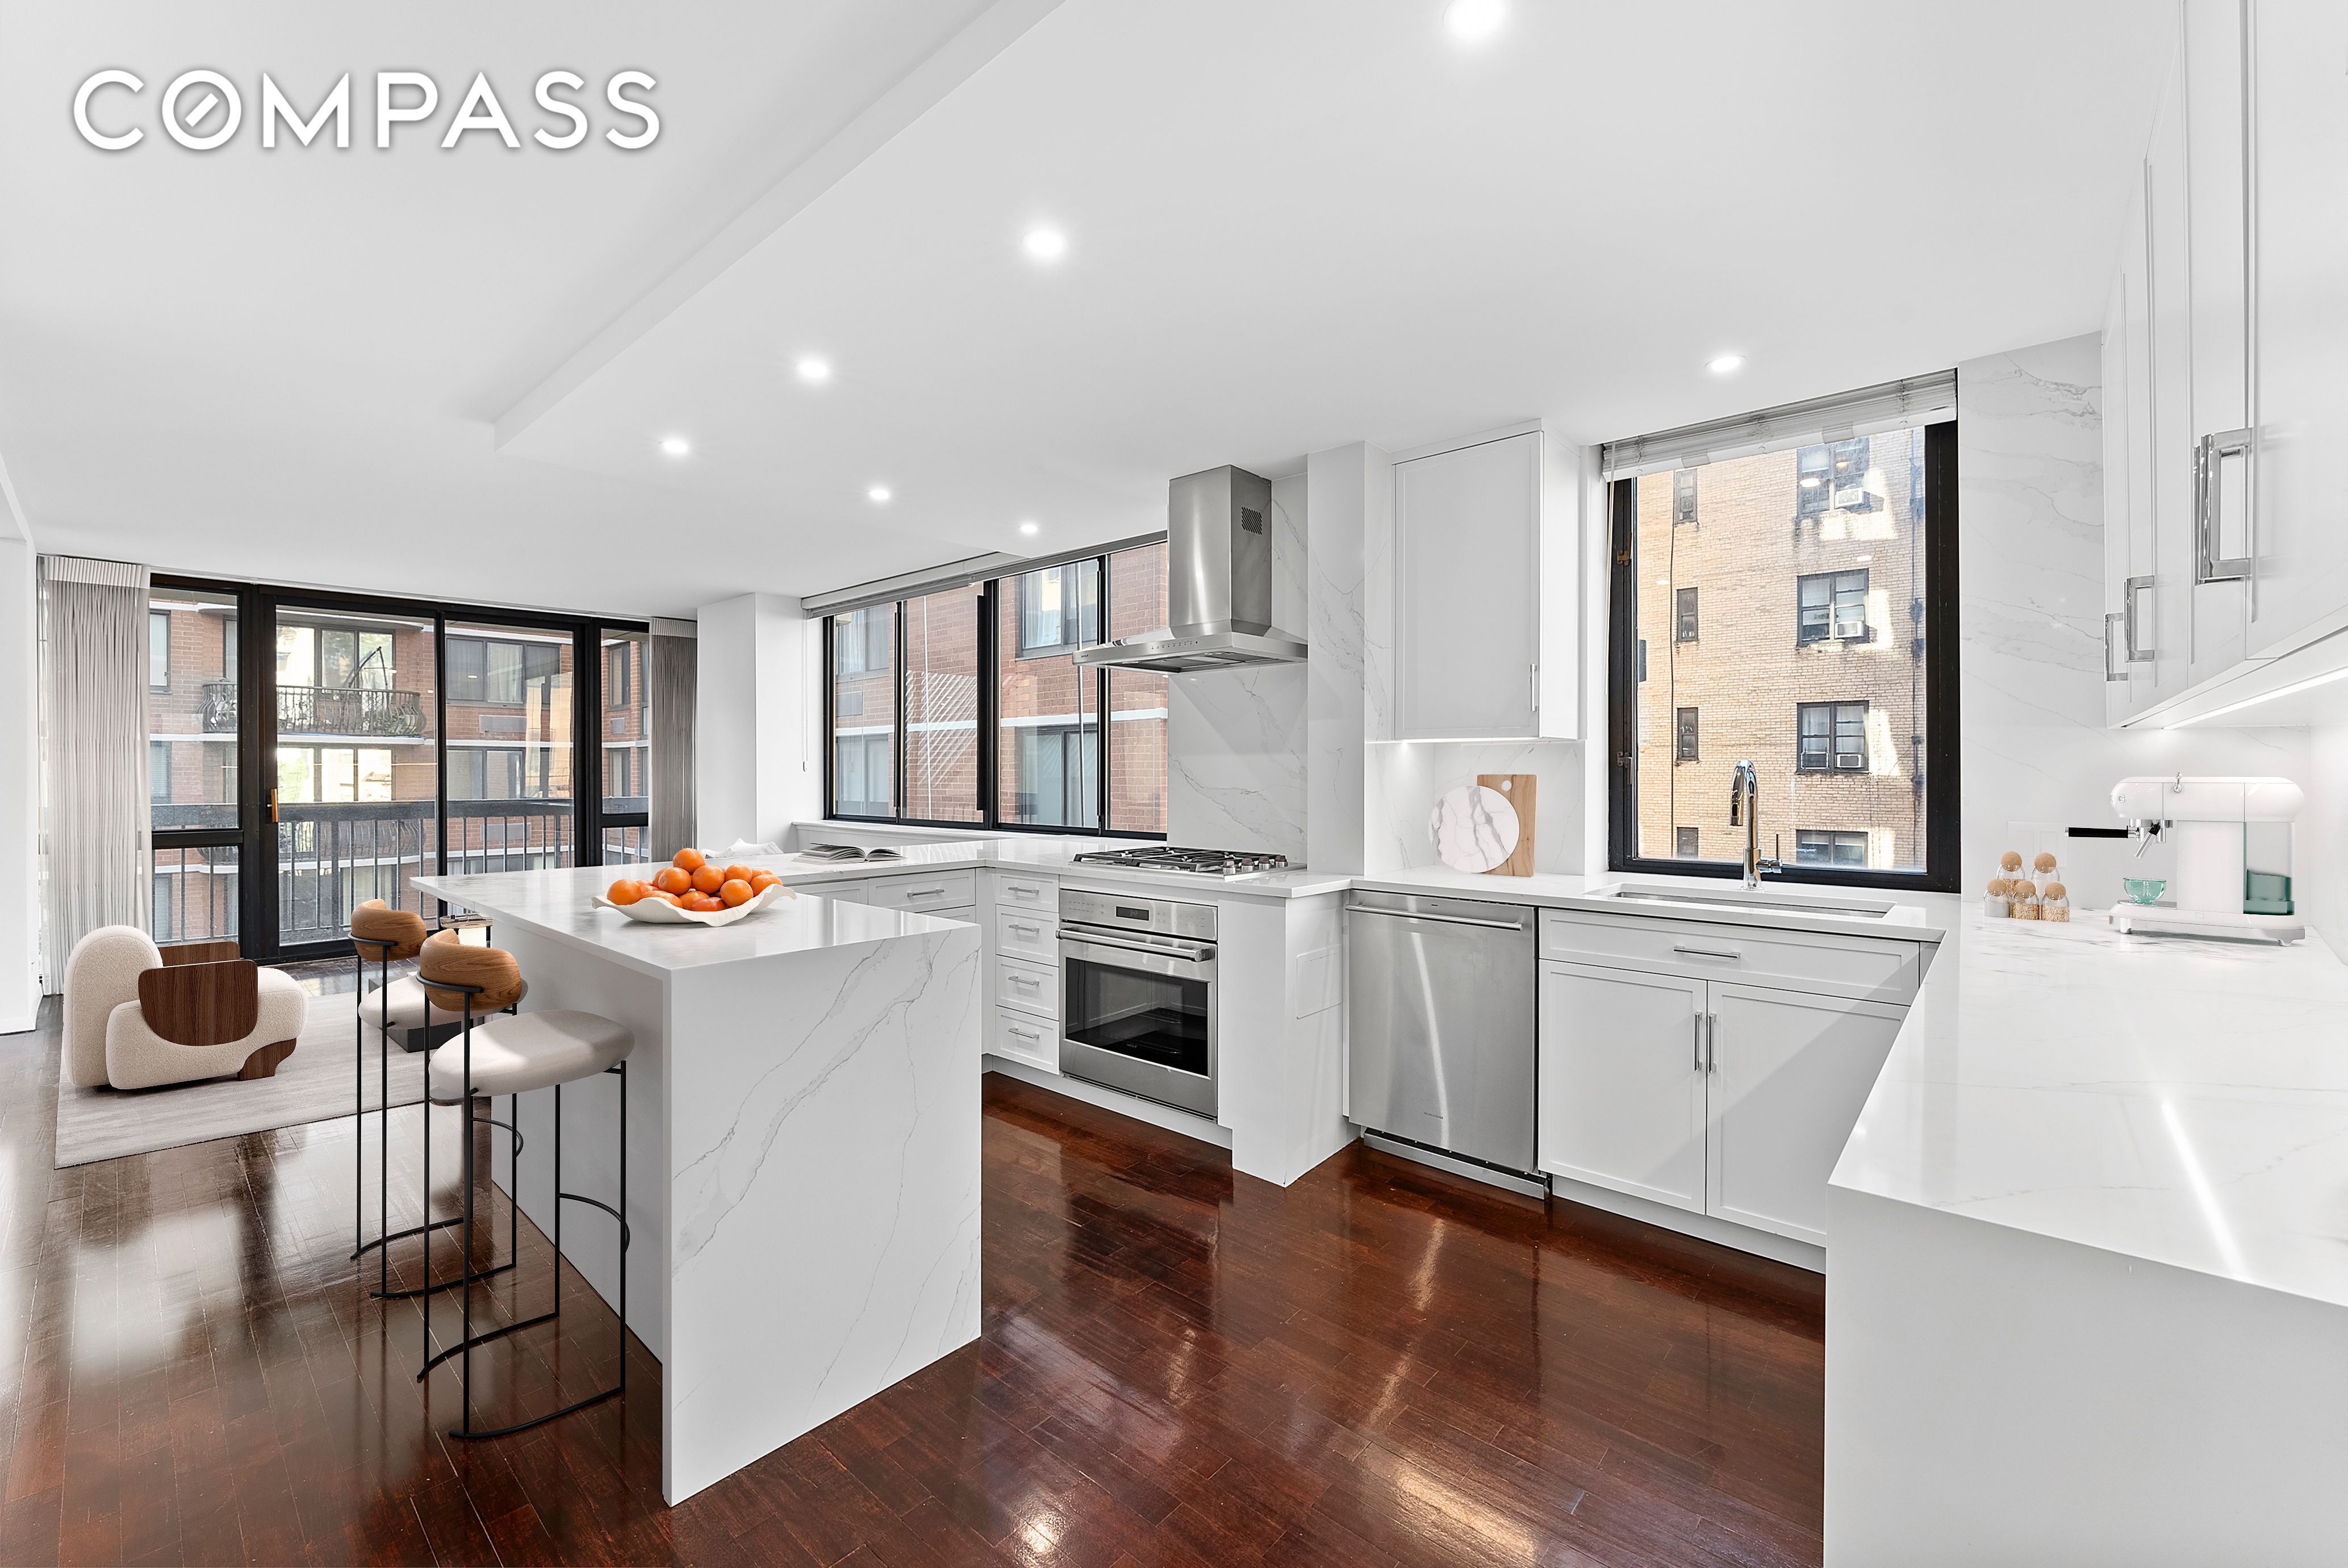 330 East 75th Street 4Fg, Lenox Hill, Upper East Side, NYC - 3 Bedrooms  
2 Bathrooms  
6 Rooms - 